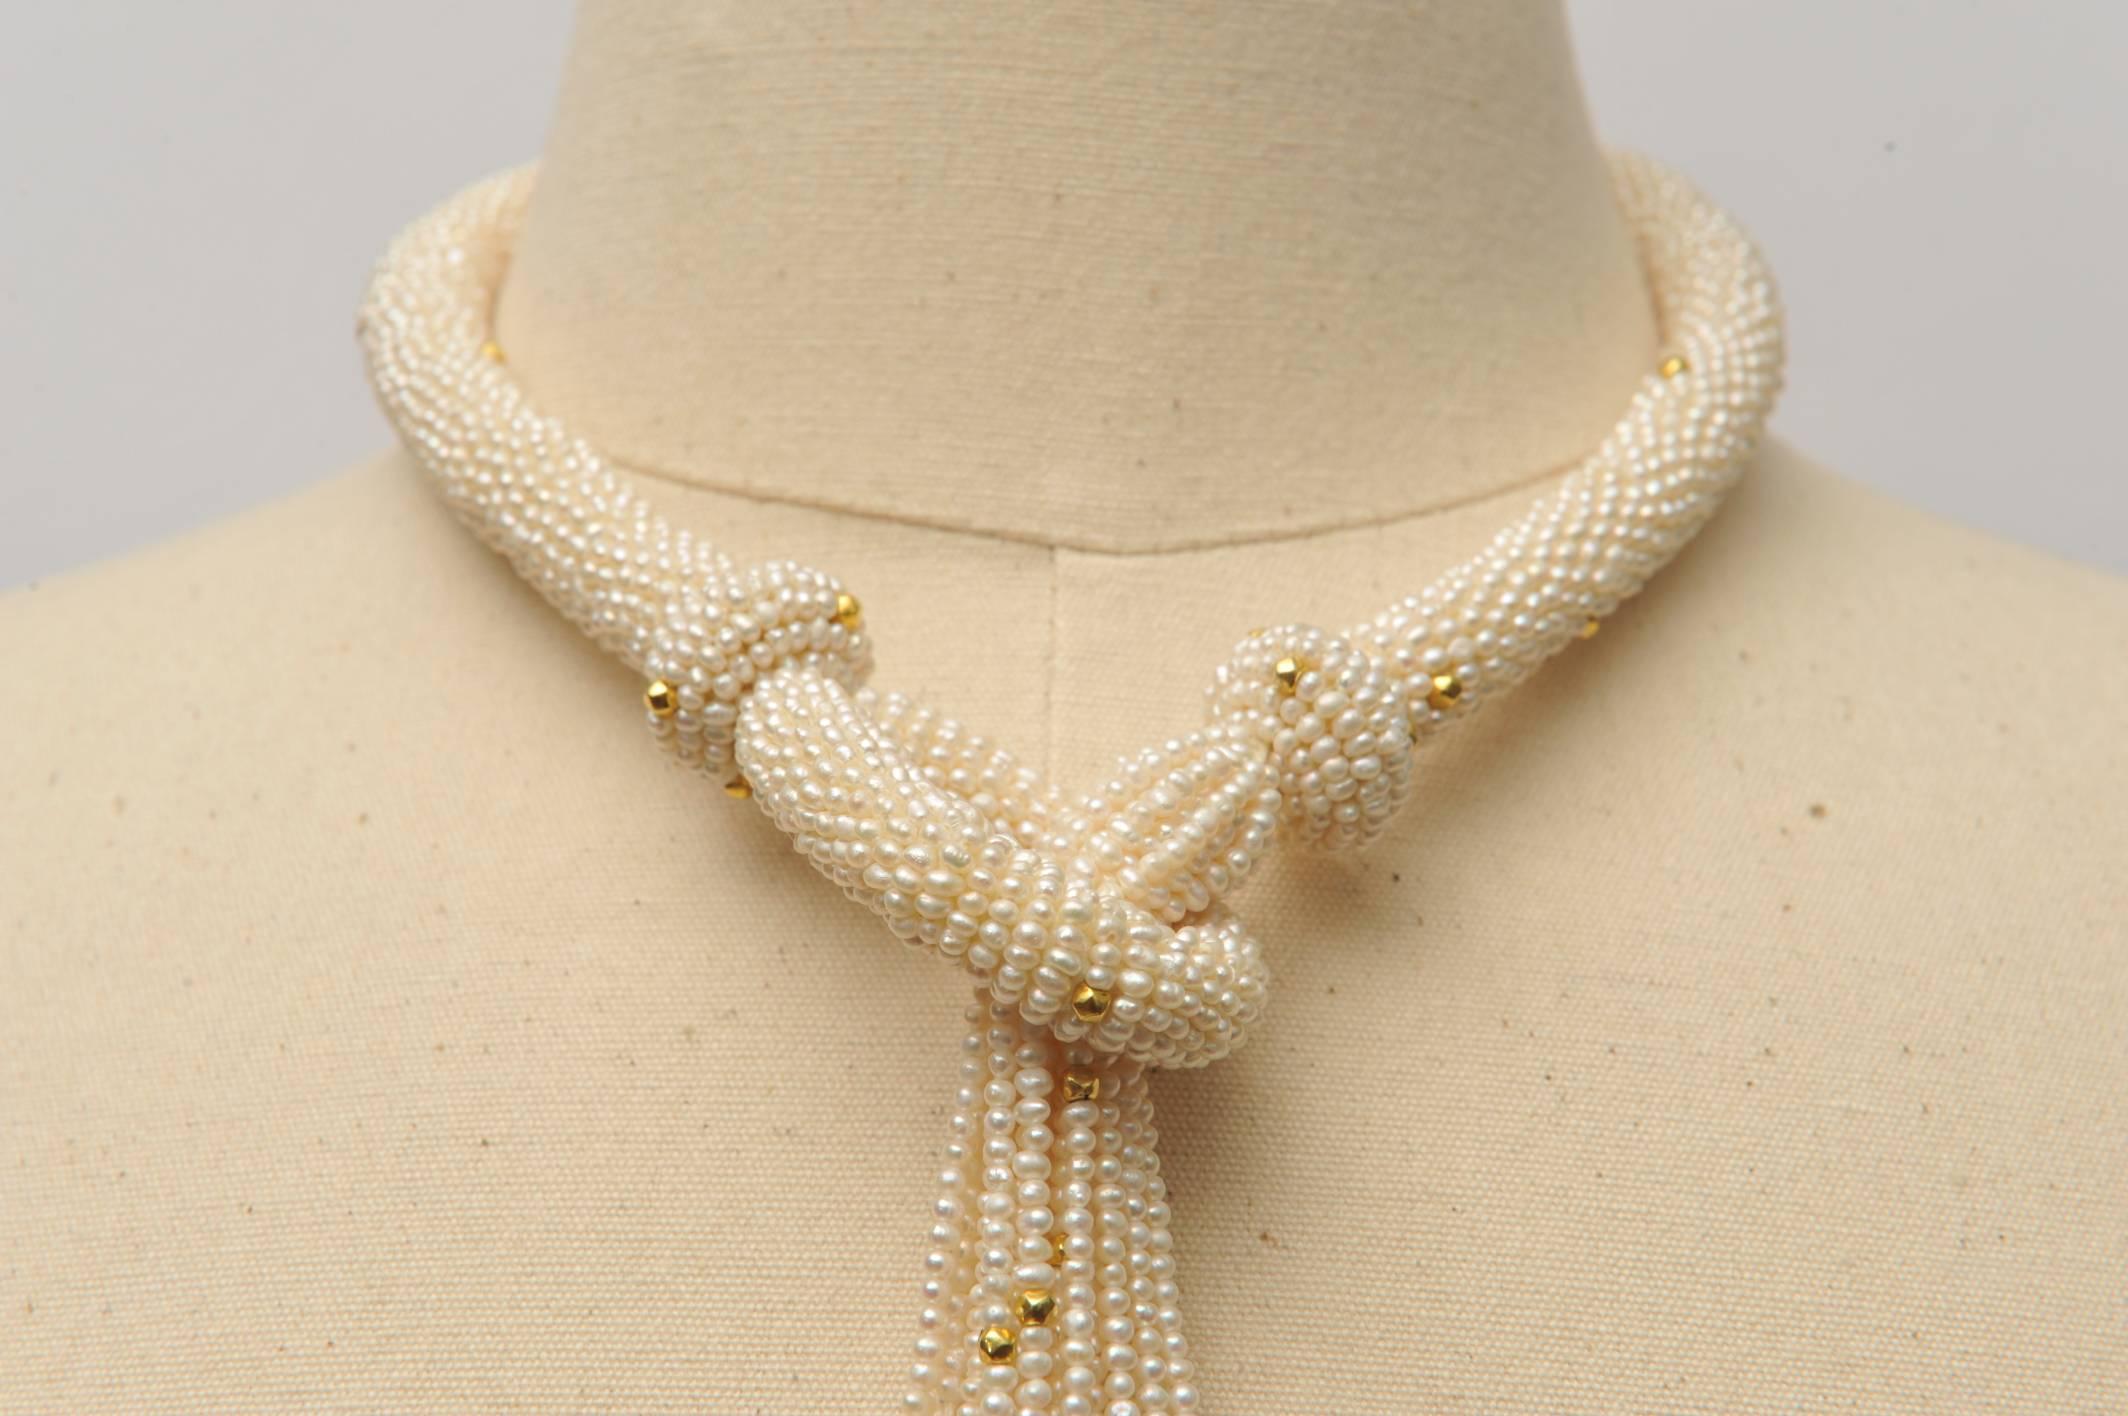 Incredible and stunning hand-woven lariat necklace made of 24 strands of seed pearls interspersed with 18K gold beads. An unusual and intricately made statement piece which can be worn a number of ways.  Just the loop section is 17.5 inches,, tassel